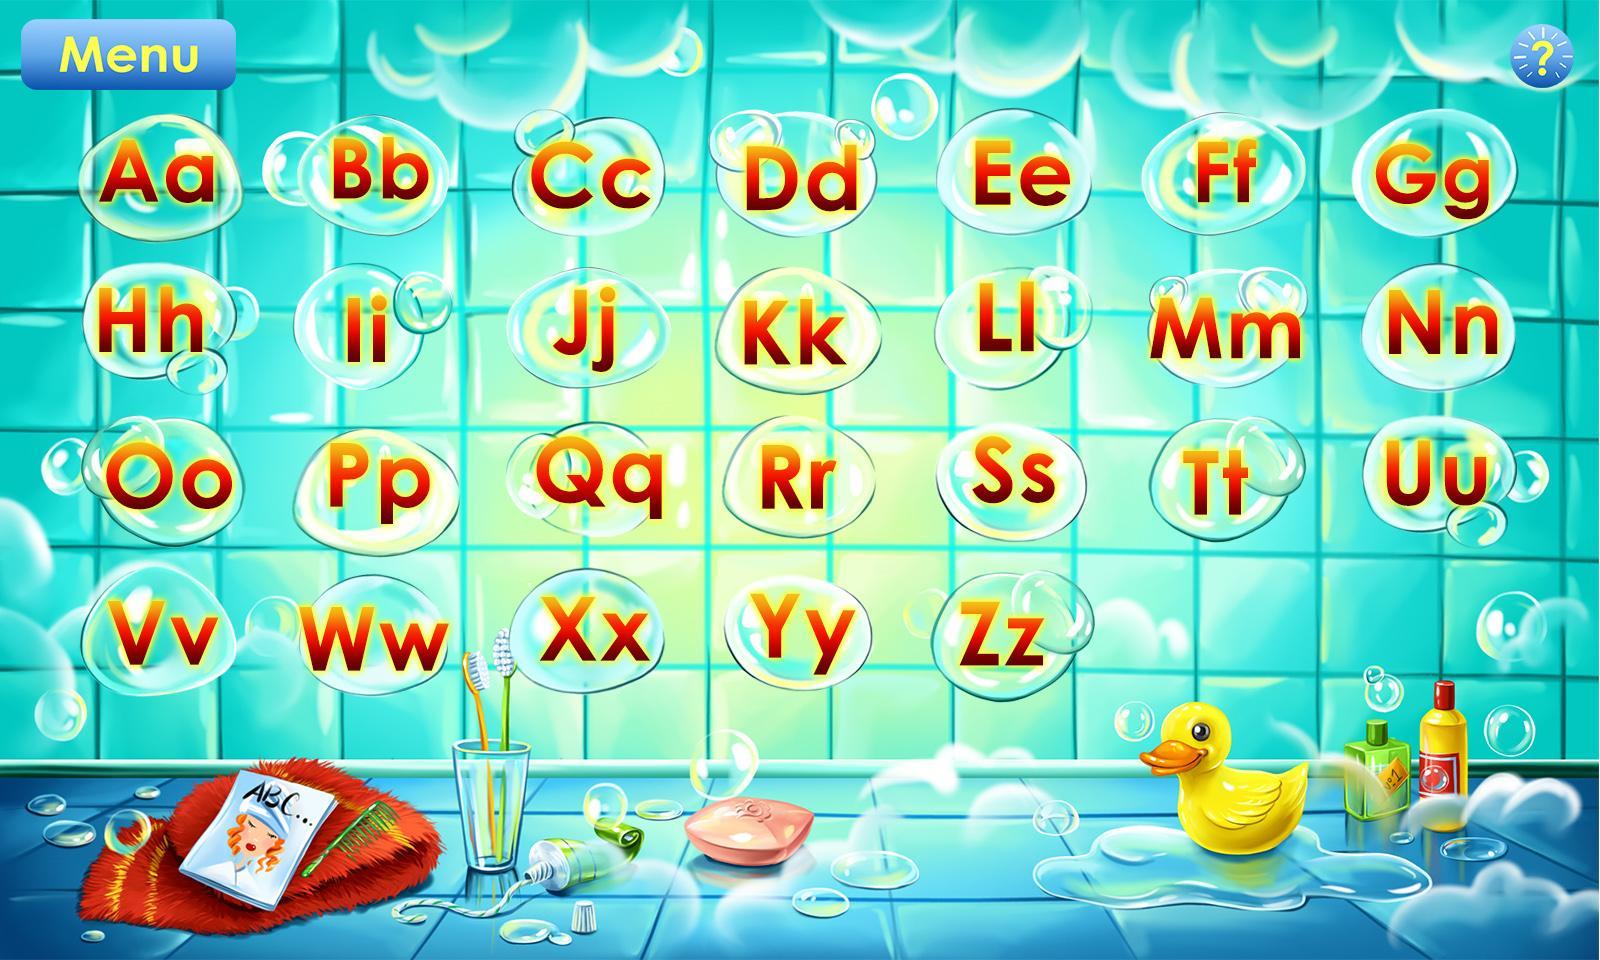 ABC Alphabet! ABCD games! Learn letters 1.5.23 Screenshot 8